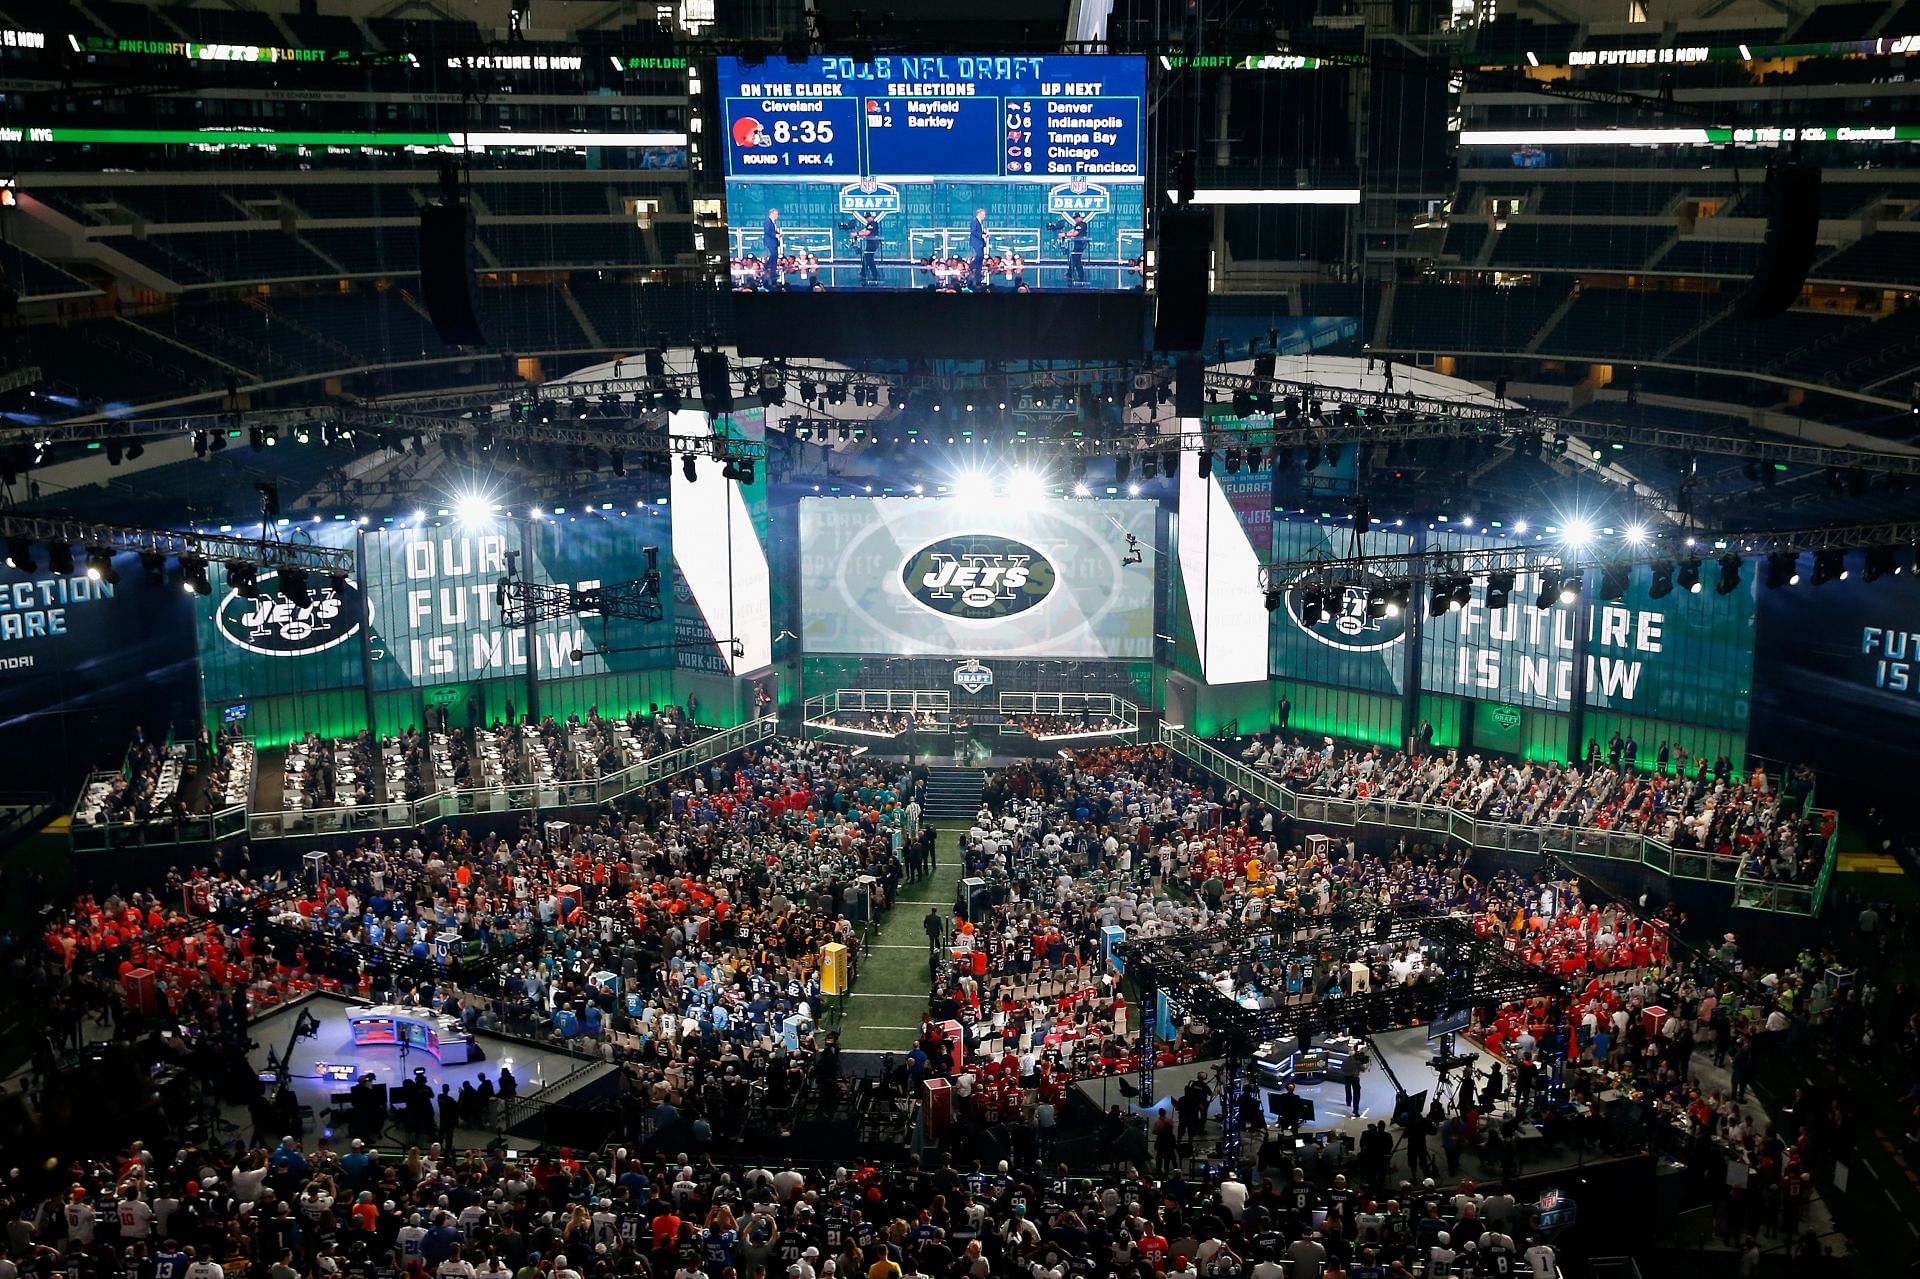 The New York Jets at the 2018 NFL Draft